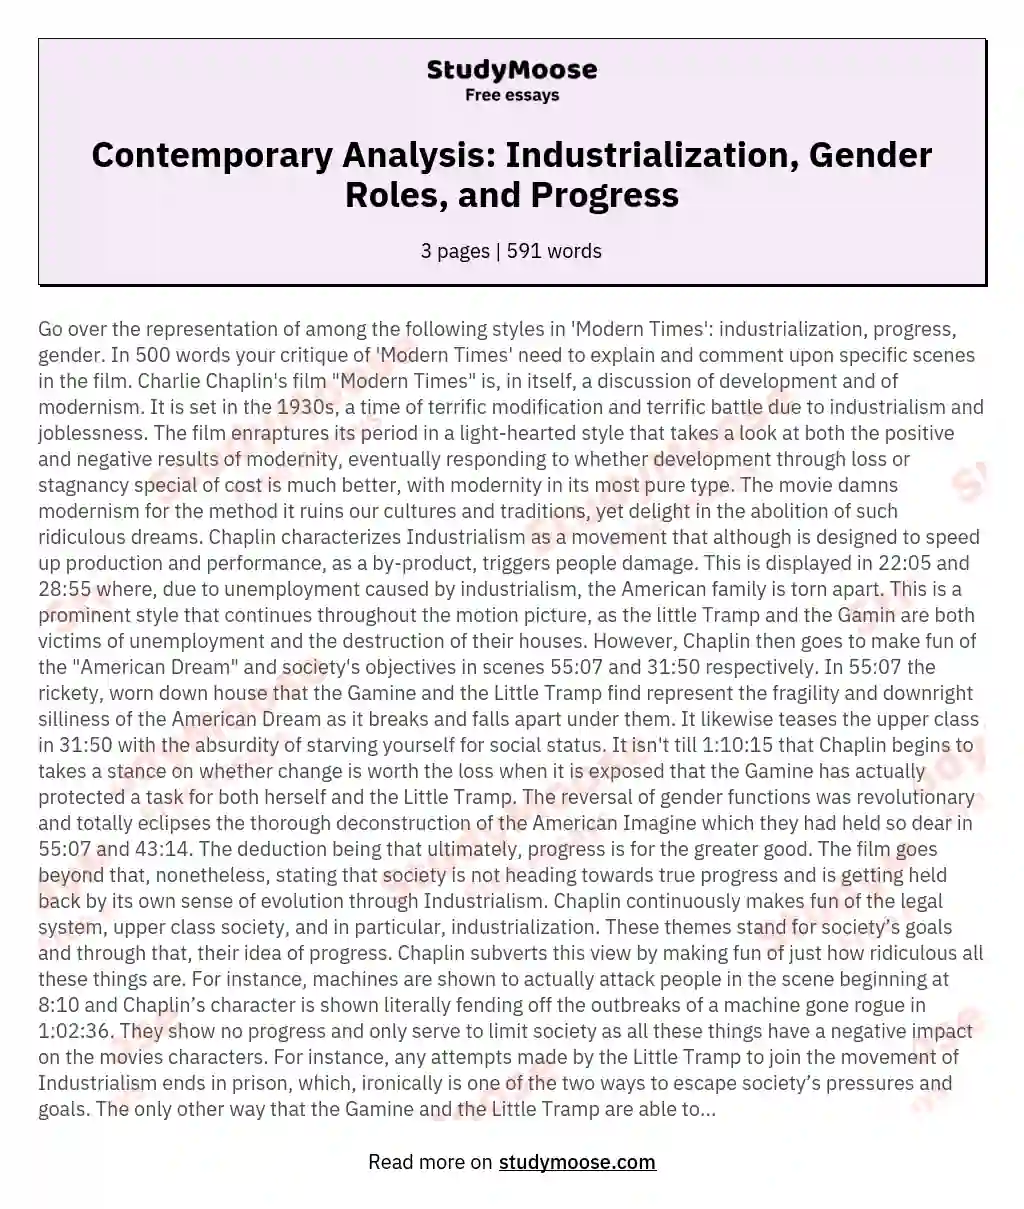 Contemporary Analysis: Industrialization, Gender Roles, and Progress essay